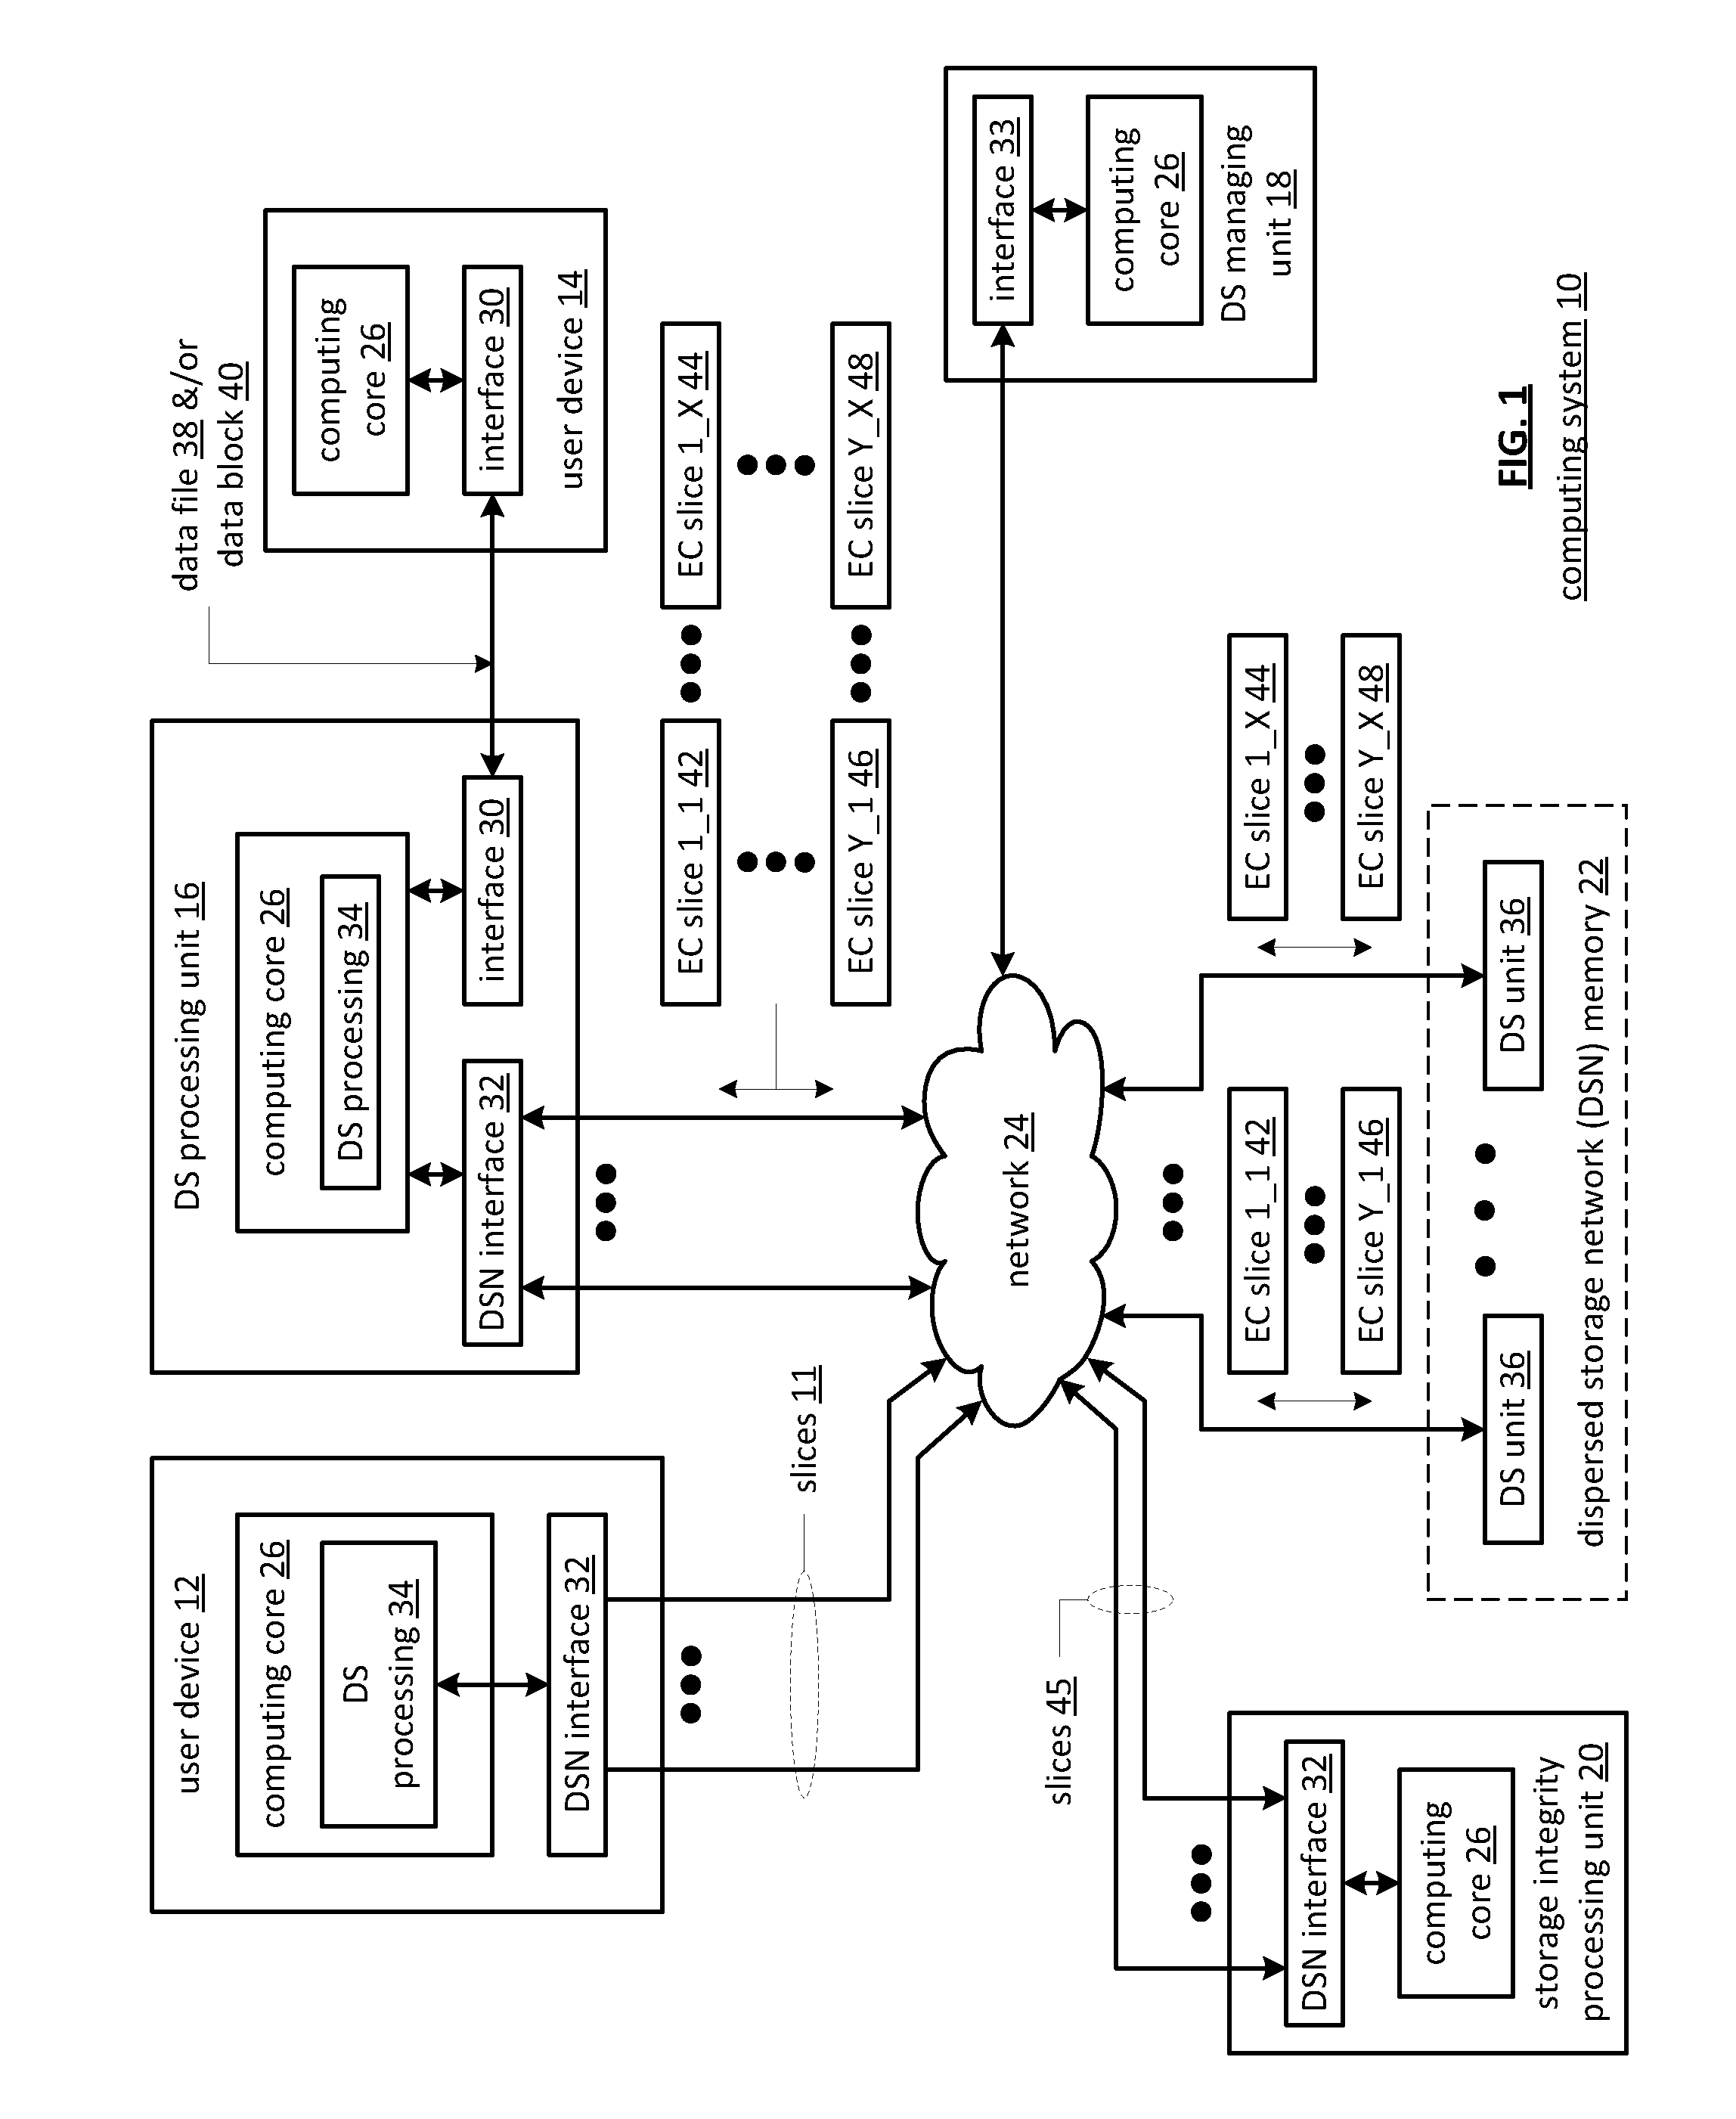 Storing data in multiple formats including a dispersed storage format